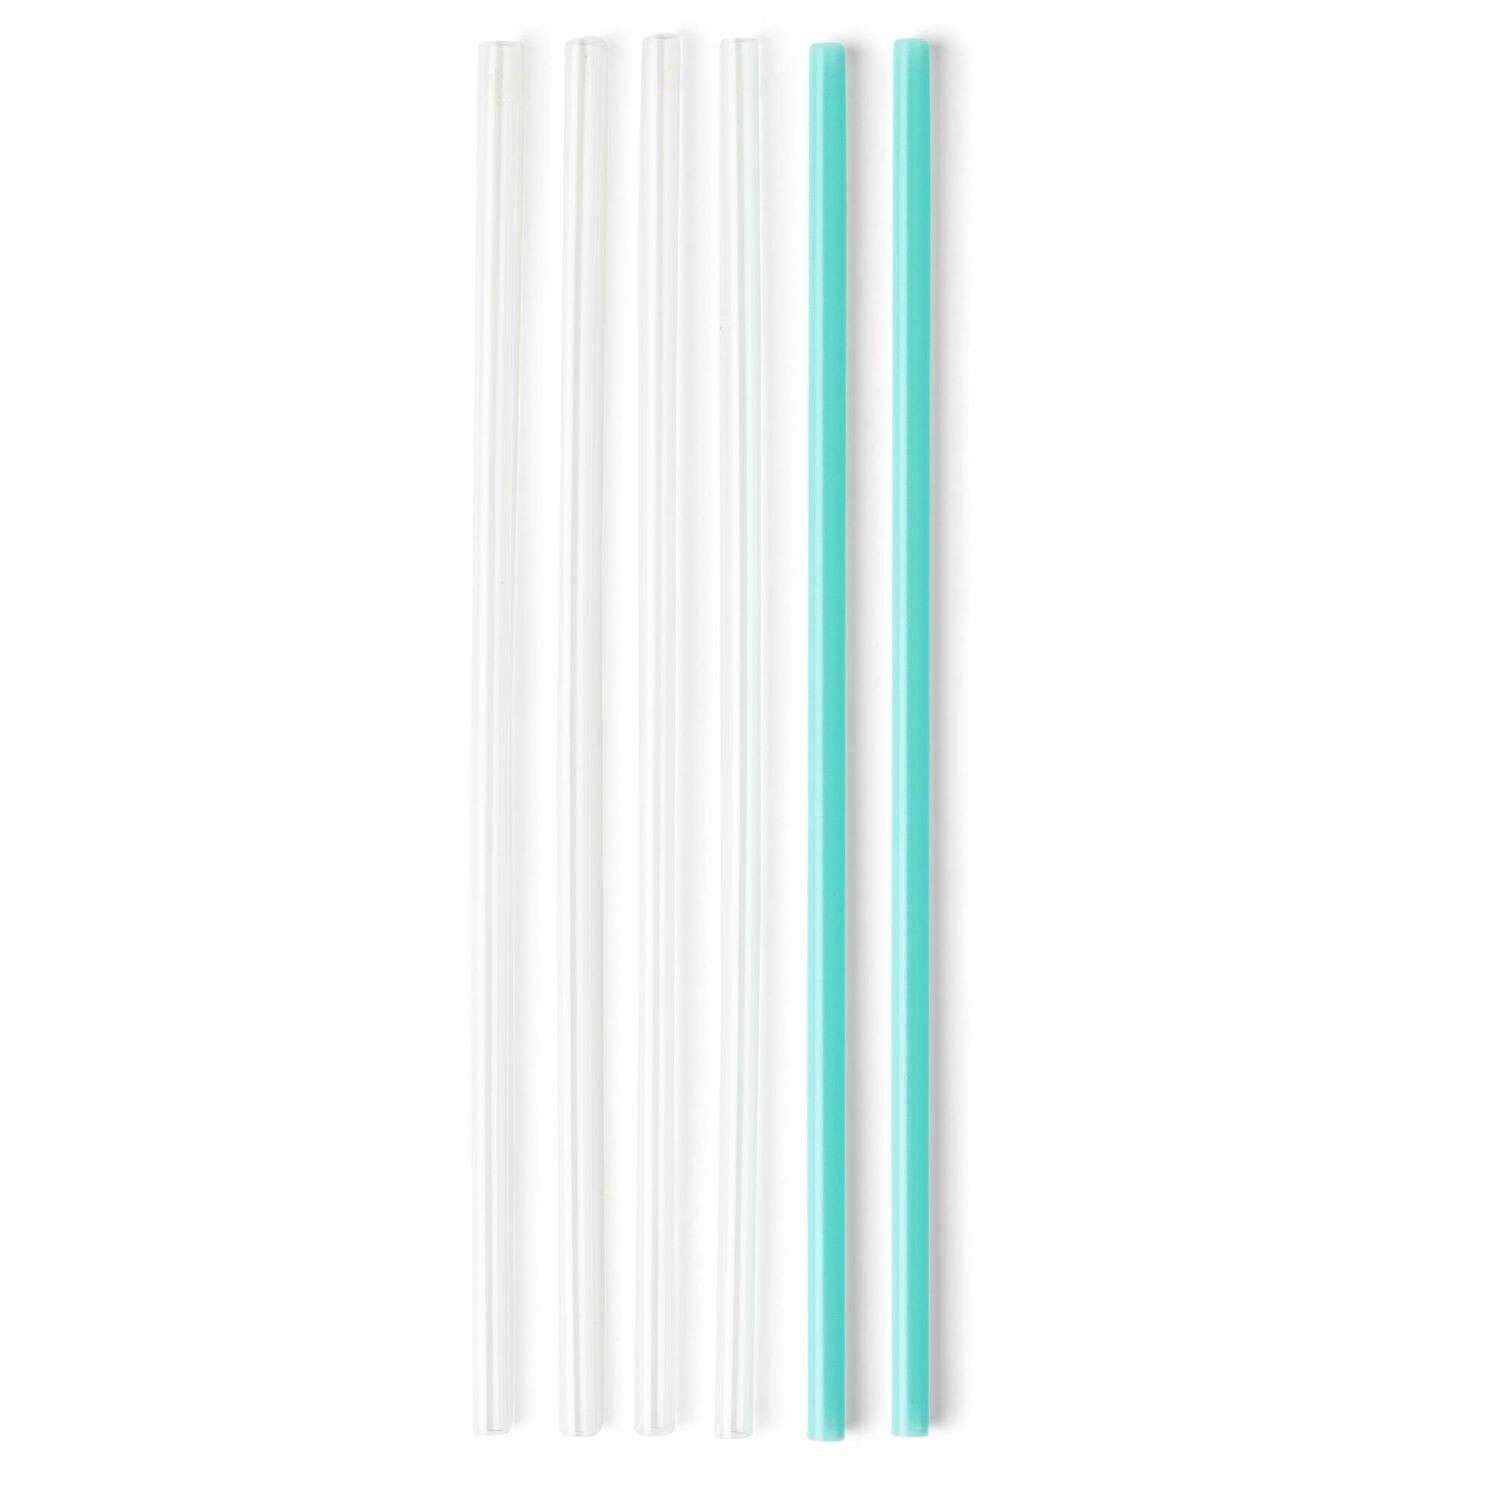 Straws - Clear And Aqua - 6 Straws & 1 Cleaning Brush